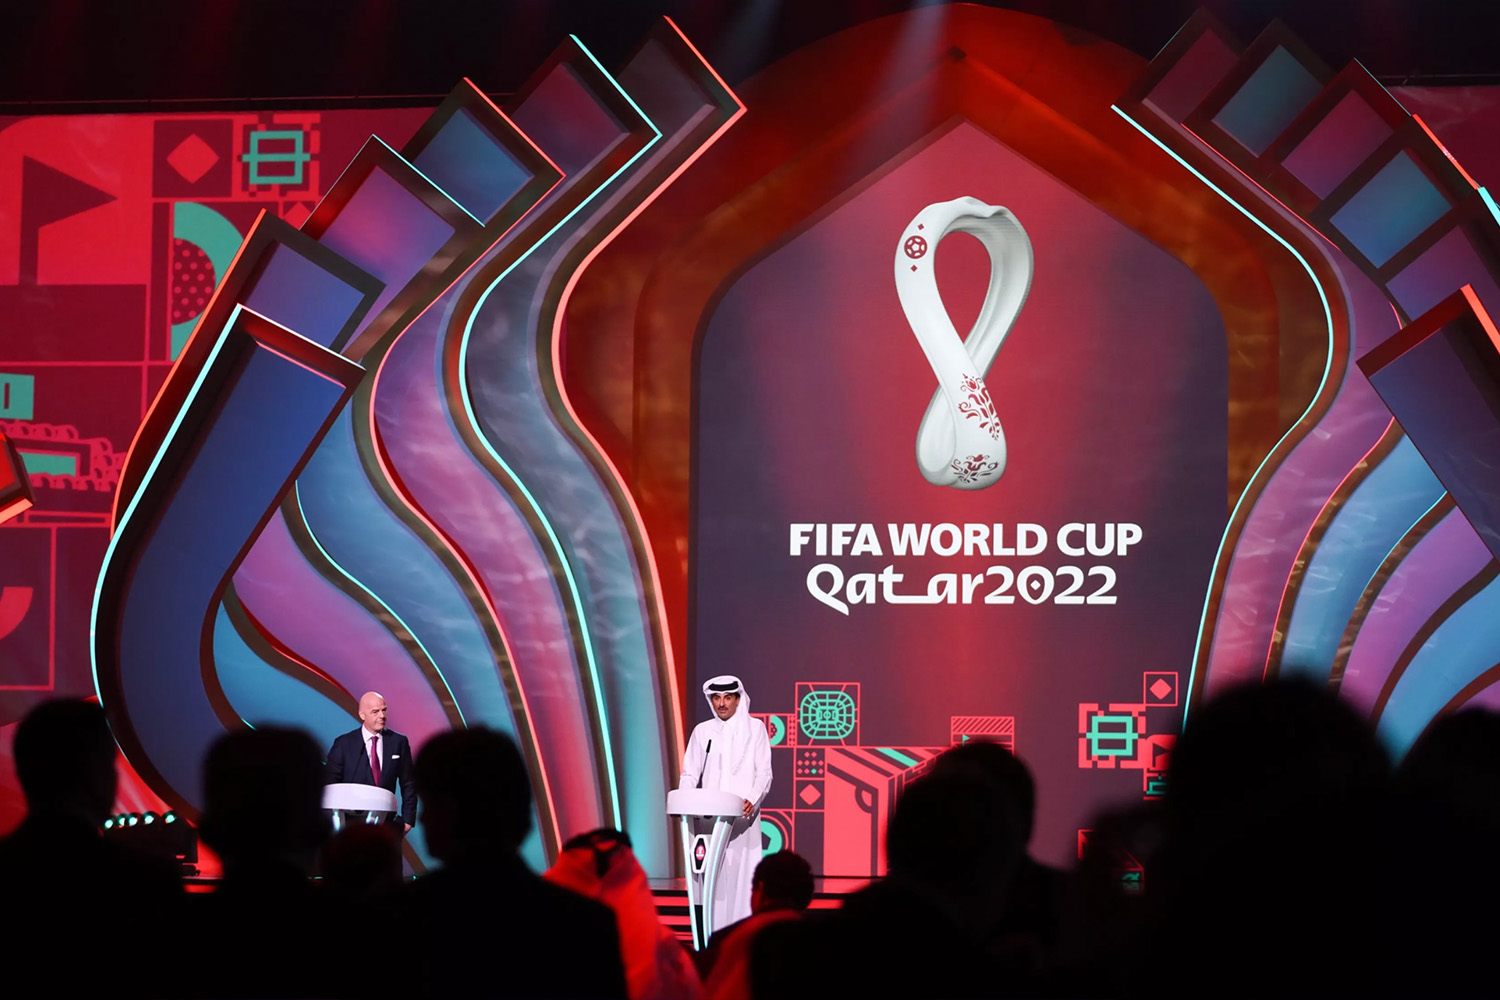 FIFA Expects 5B Viewers for Qatar World Cup